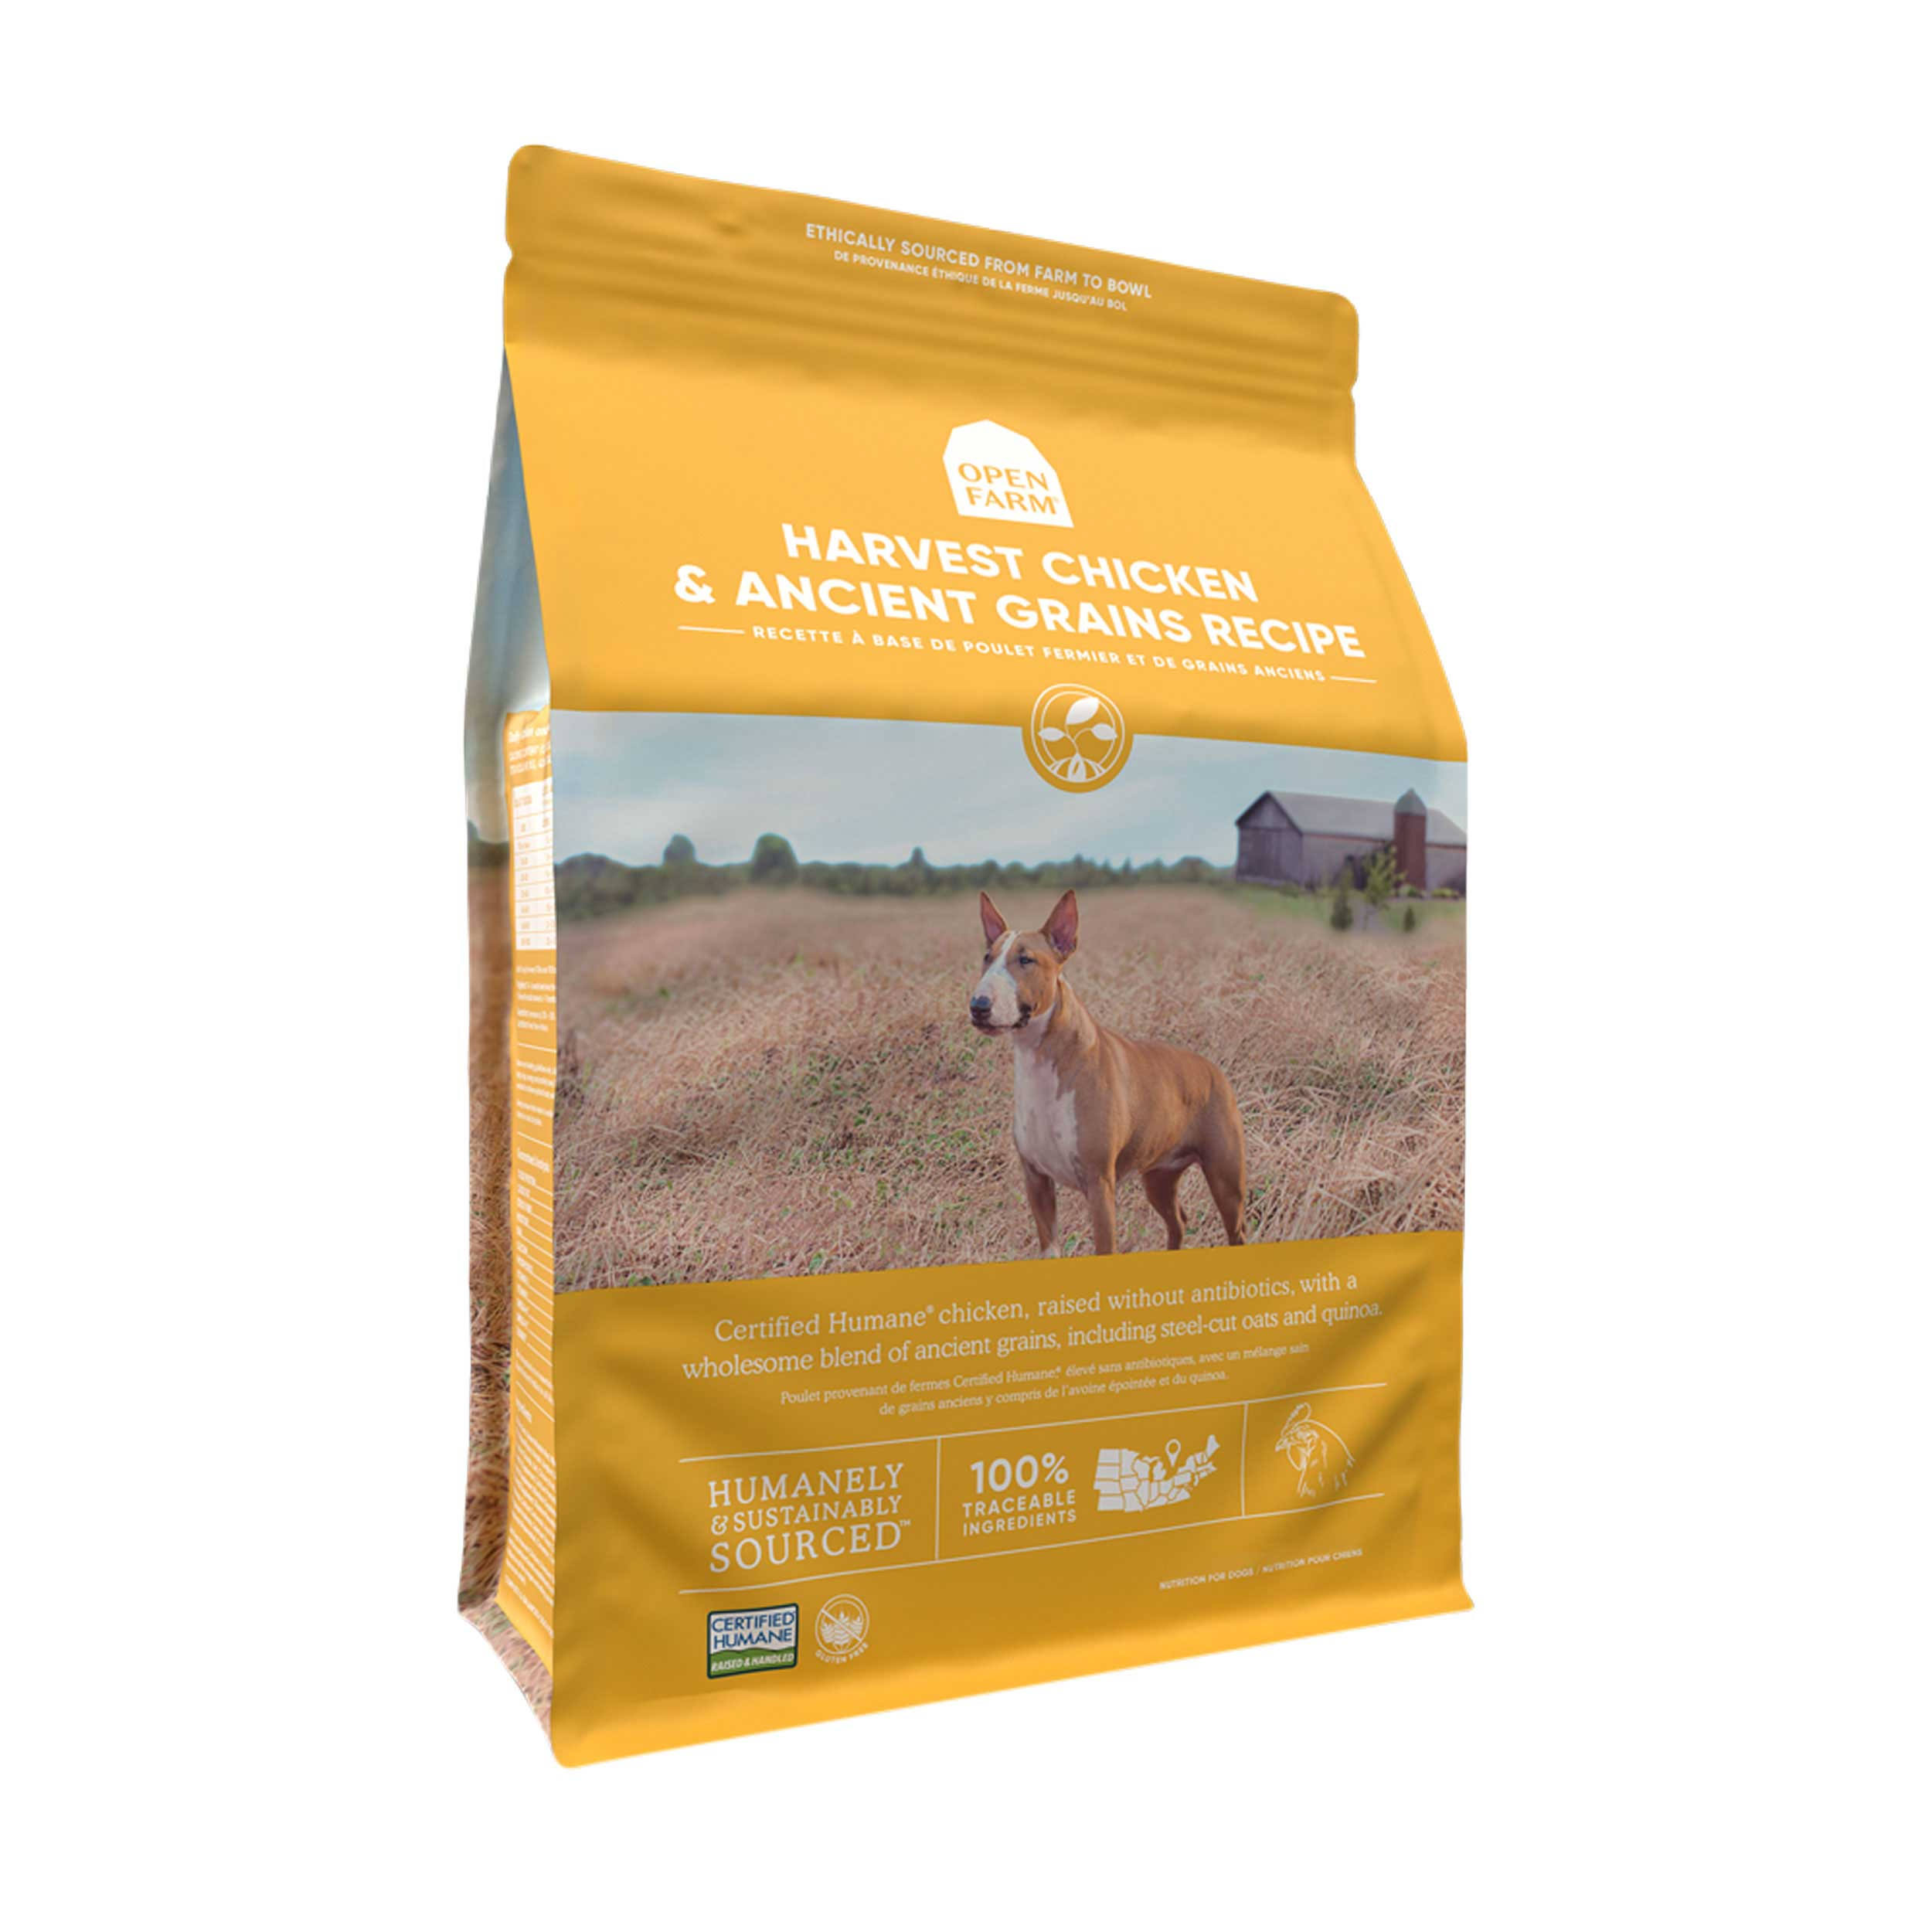 Open Farm Harvest Chicken & Ancient Grains Dry Dog Food - 22-lbs